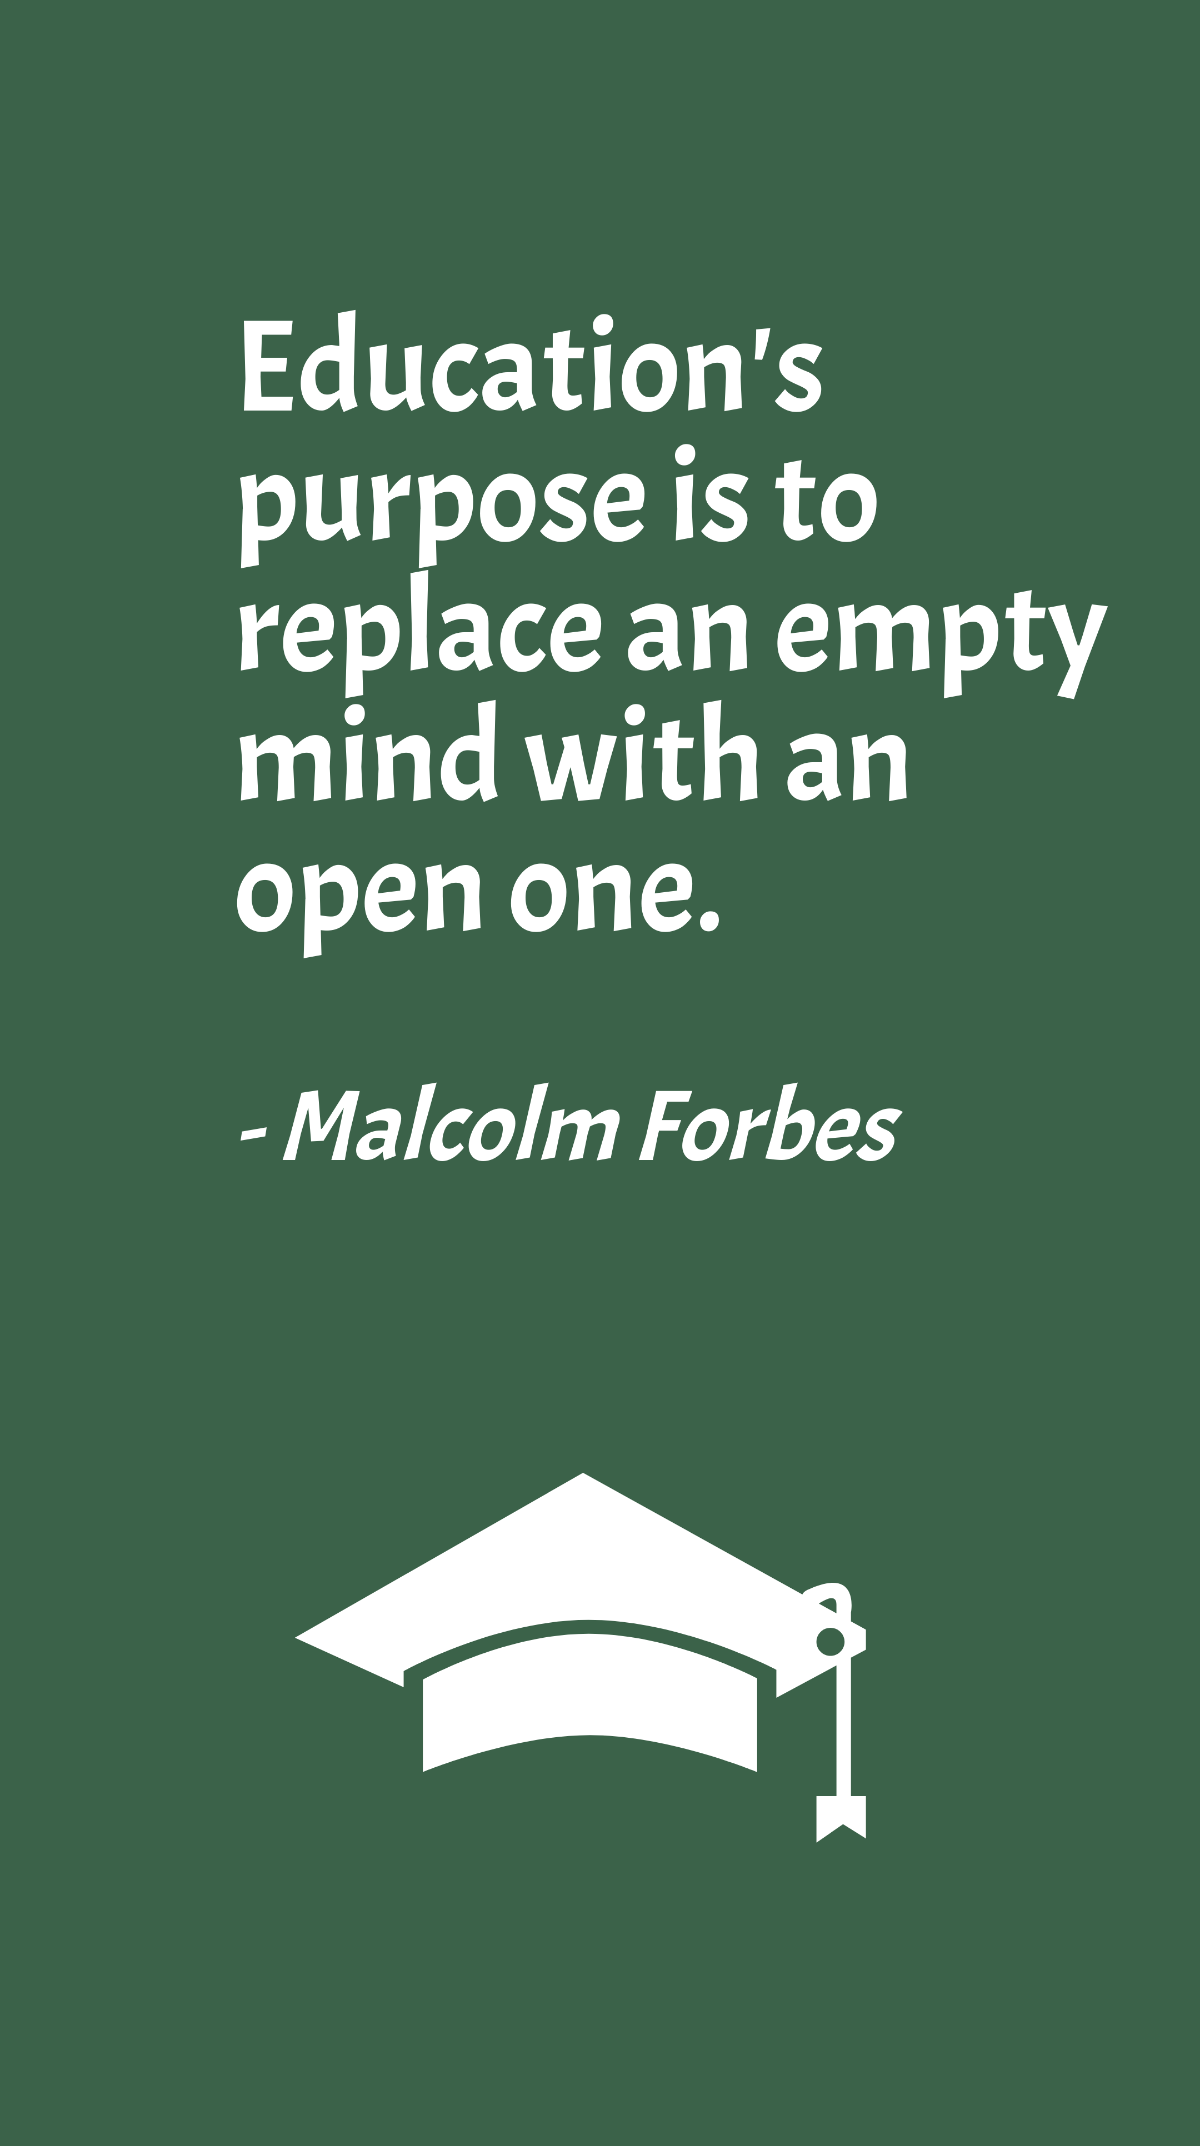 Malcolm Forbes - Education's purpose is to replace an empty mind with an open one. Template